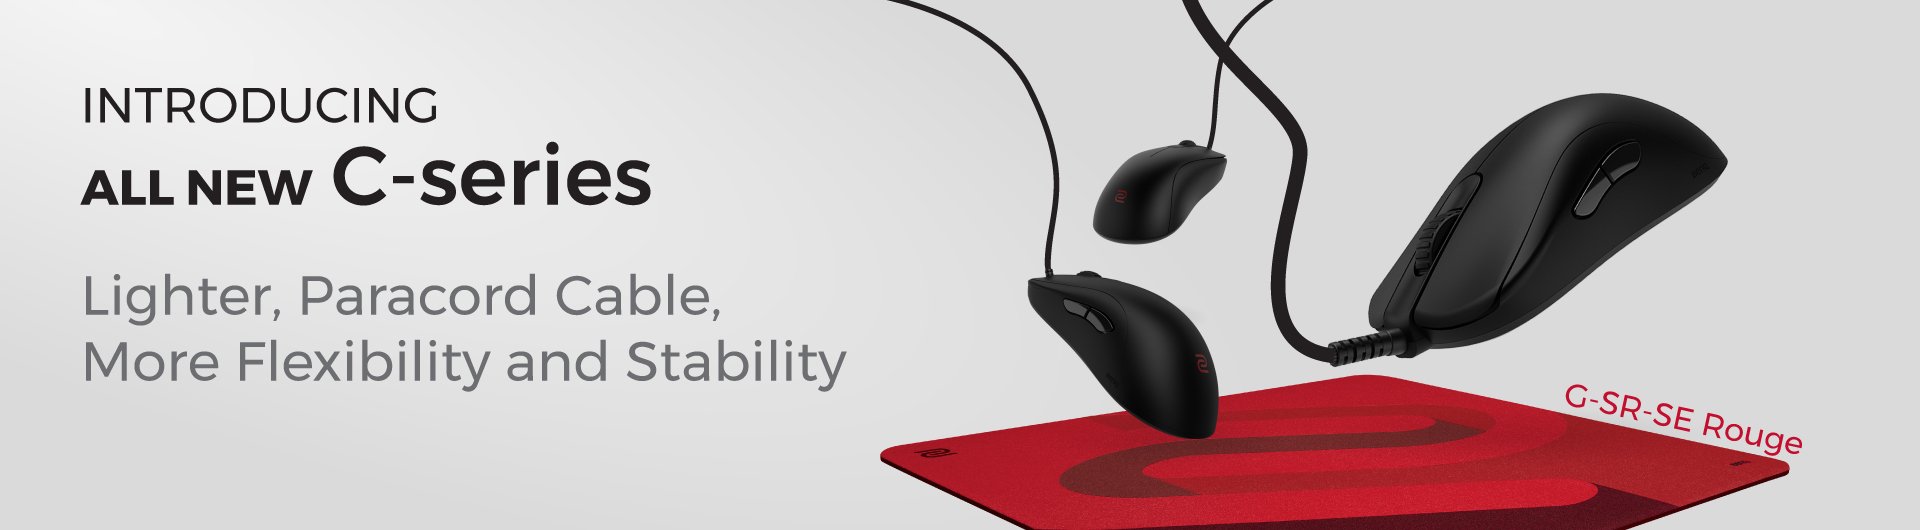 BenQ ZOWIE Australia NEW C Series Mice and G-SR-SE Rouge Mousepad